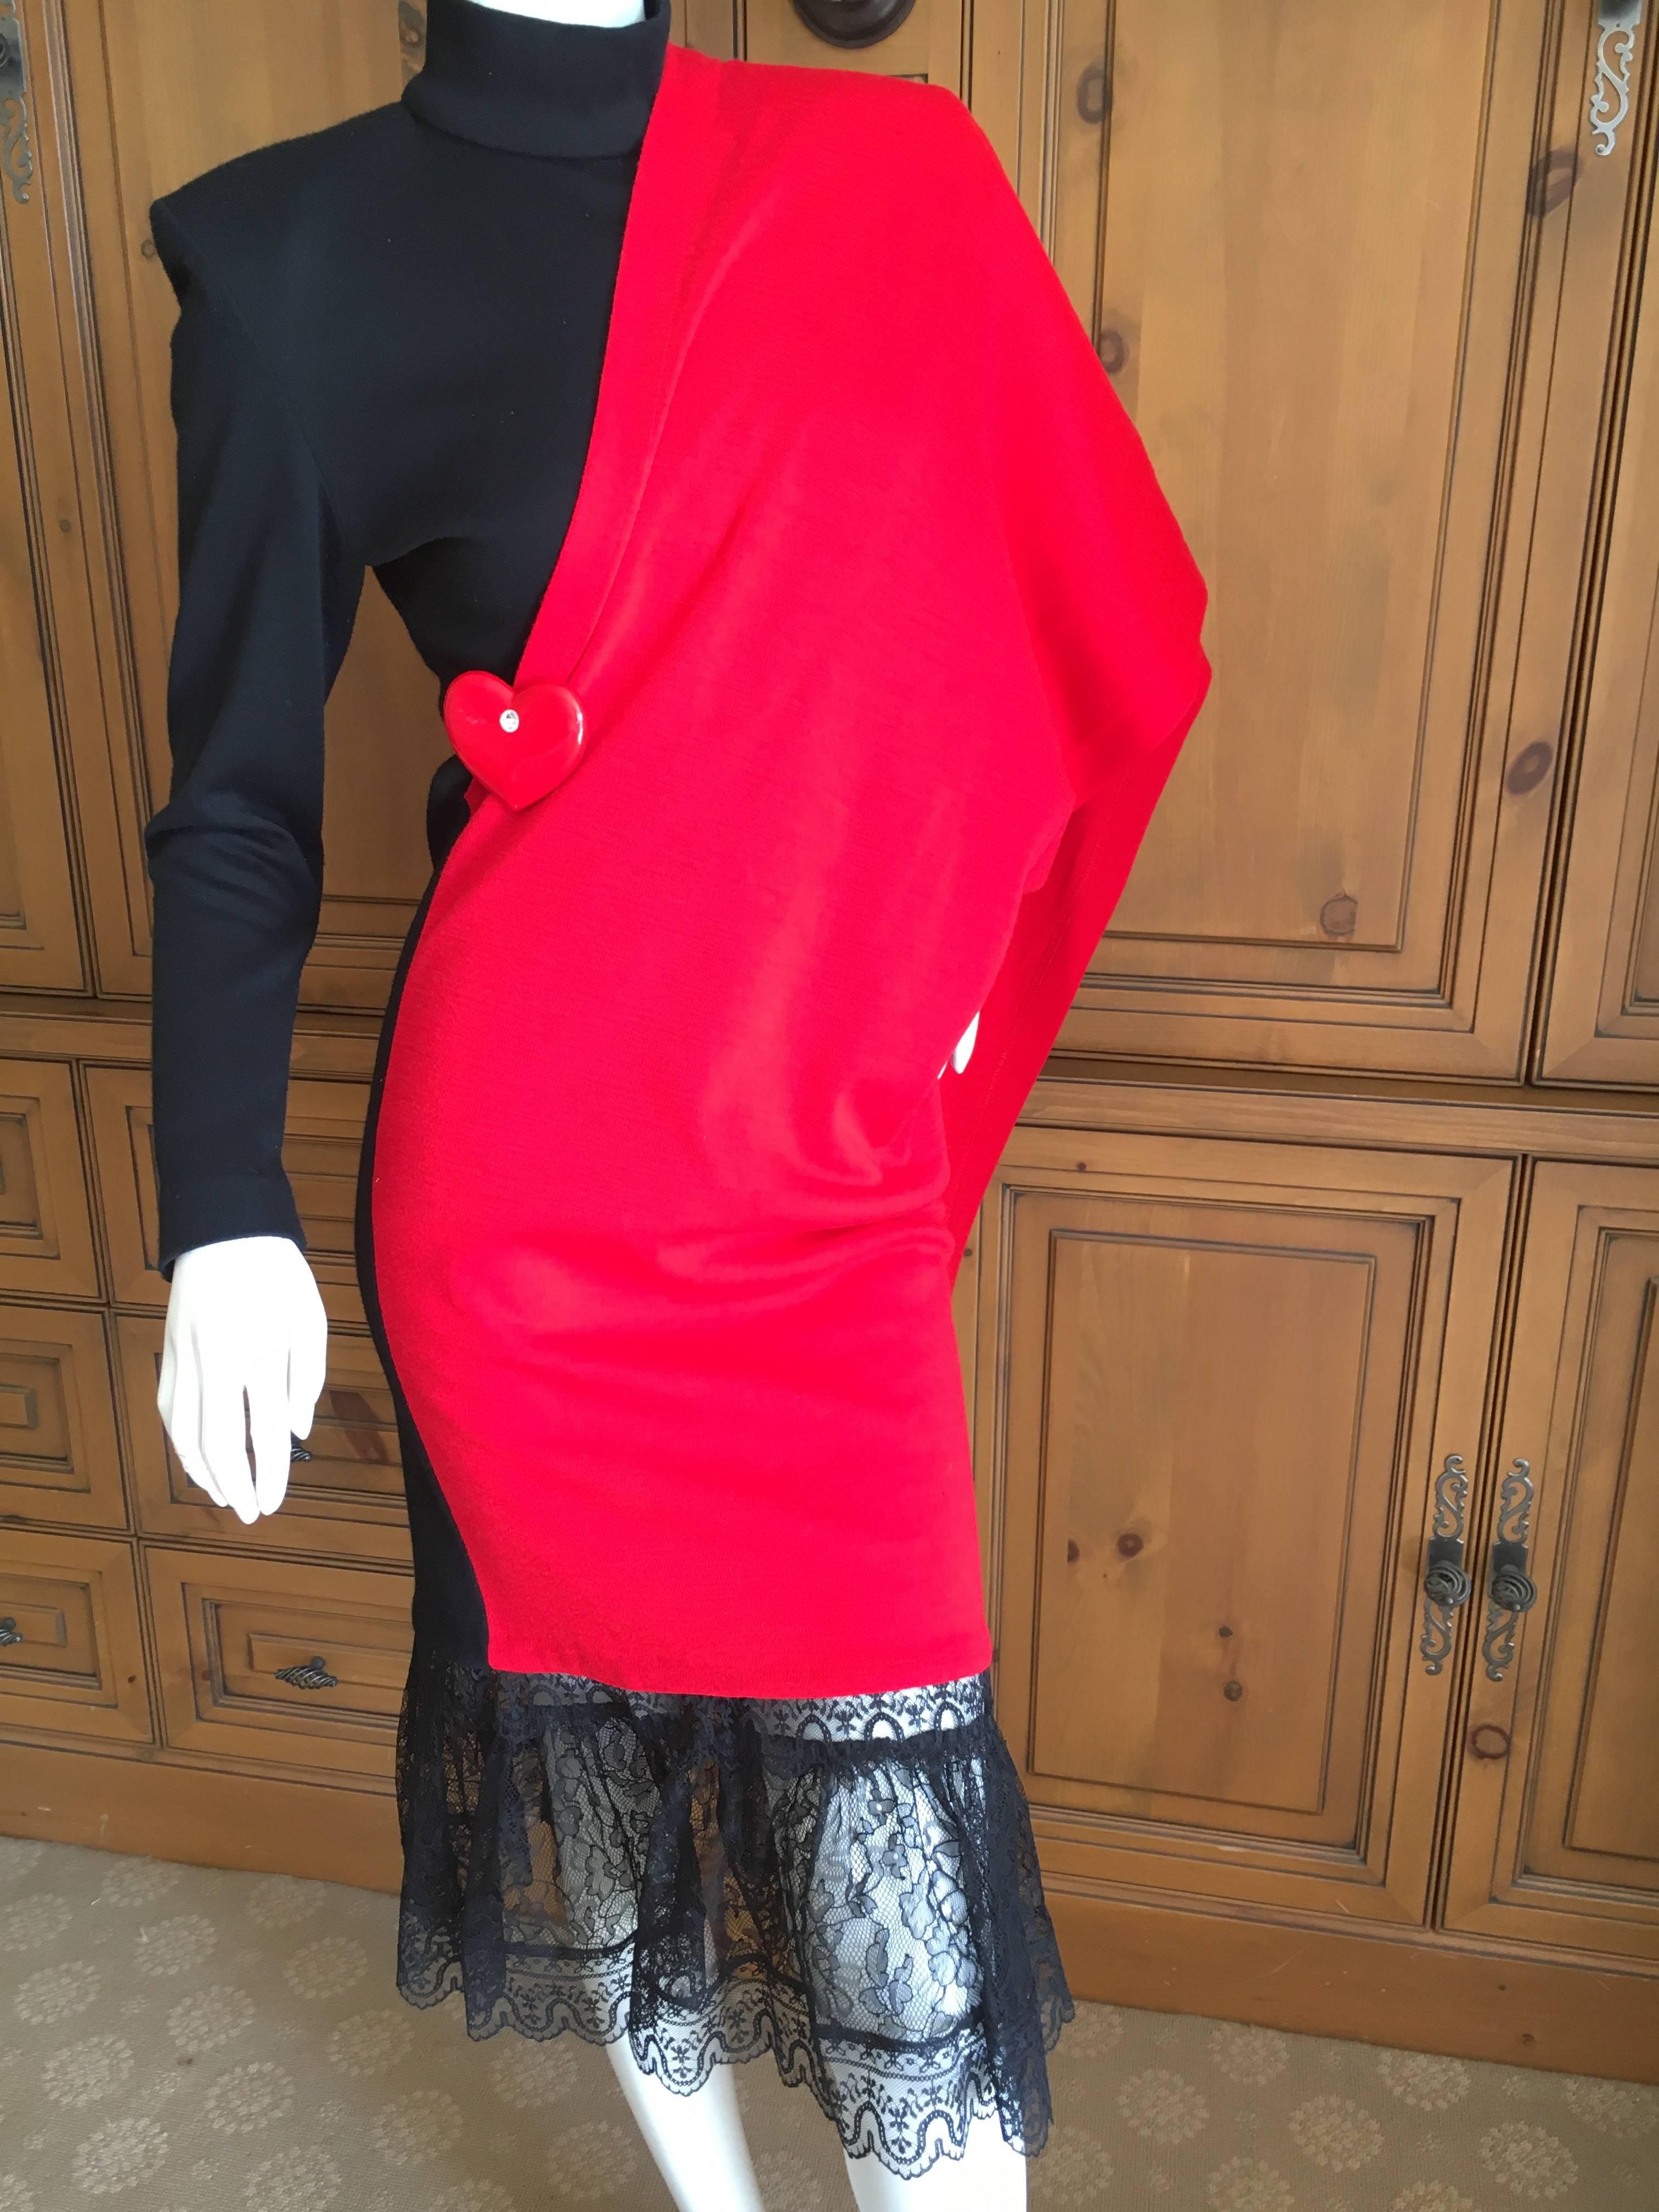 black dress with red sash